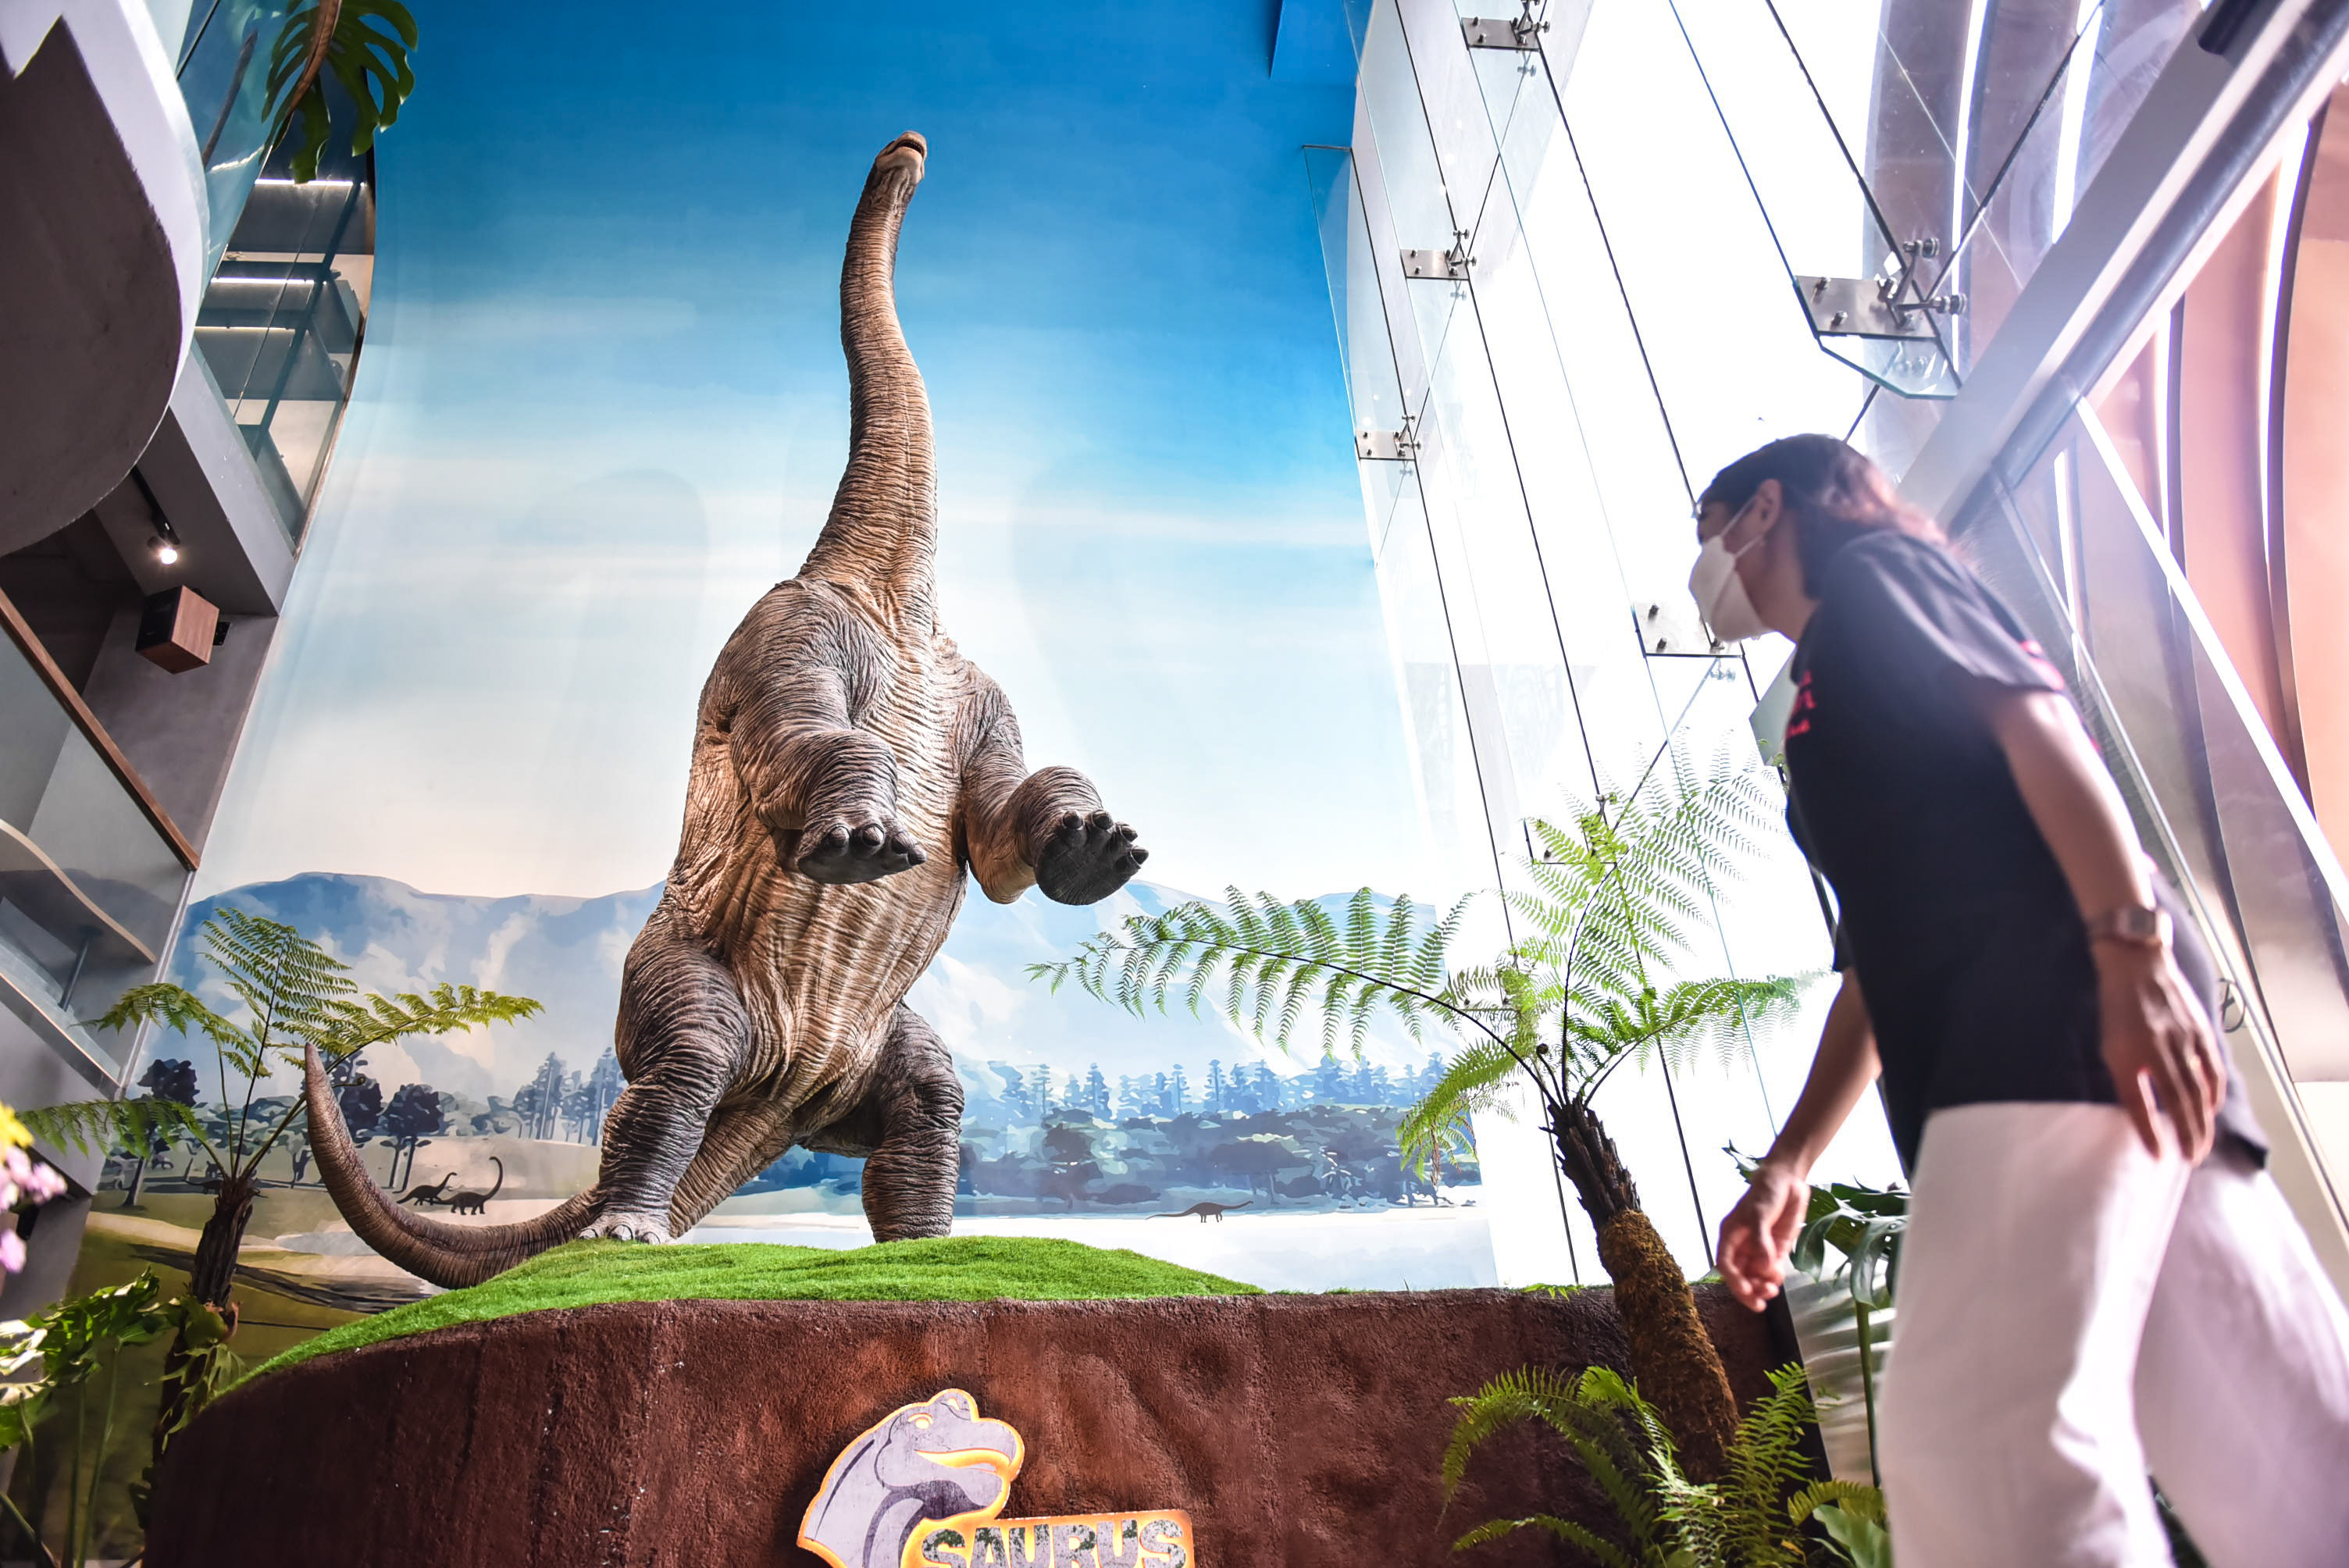 Into the Jurassic World: Ho Chi Minh City cafe transports guests into the past with 200 dinosaur models